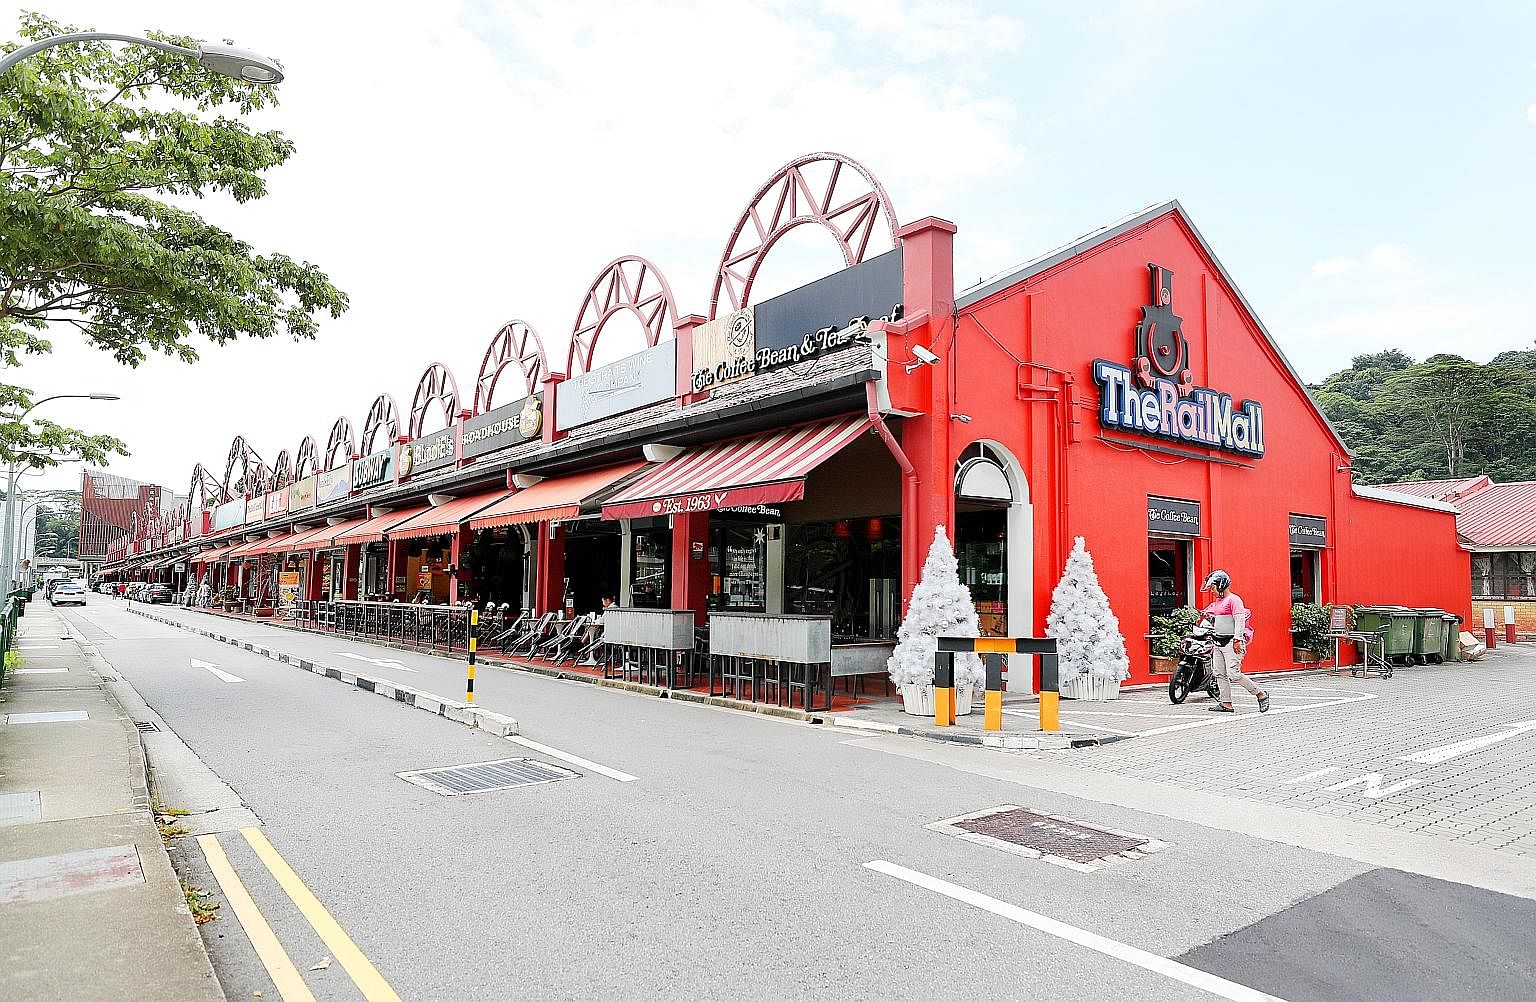 Three shophouses in Mosque Street - Nos. 48, 49 and 50 (above) - were sold for $64.8 million and converted into a boutique hotel, while four shophouses at Rail Mall (right), a stretch of shopping and dining outlets in Upper Bukit Timah Road, were sol